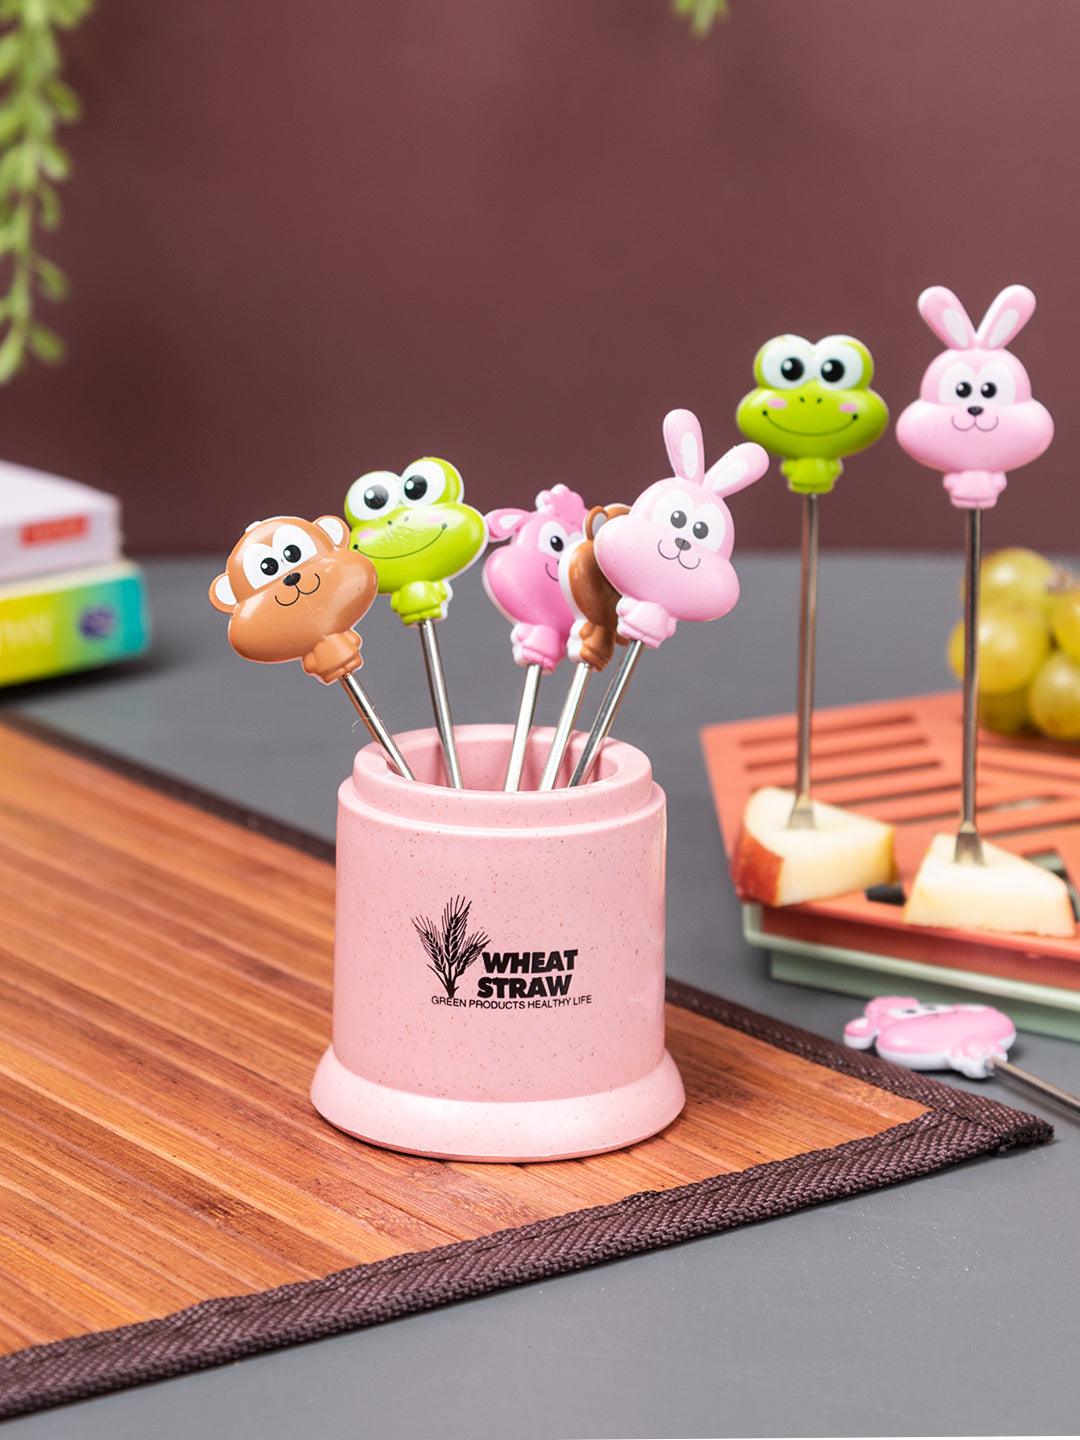 Pack of 7 Plastic Fruit Forks with Cute Animal Designs